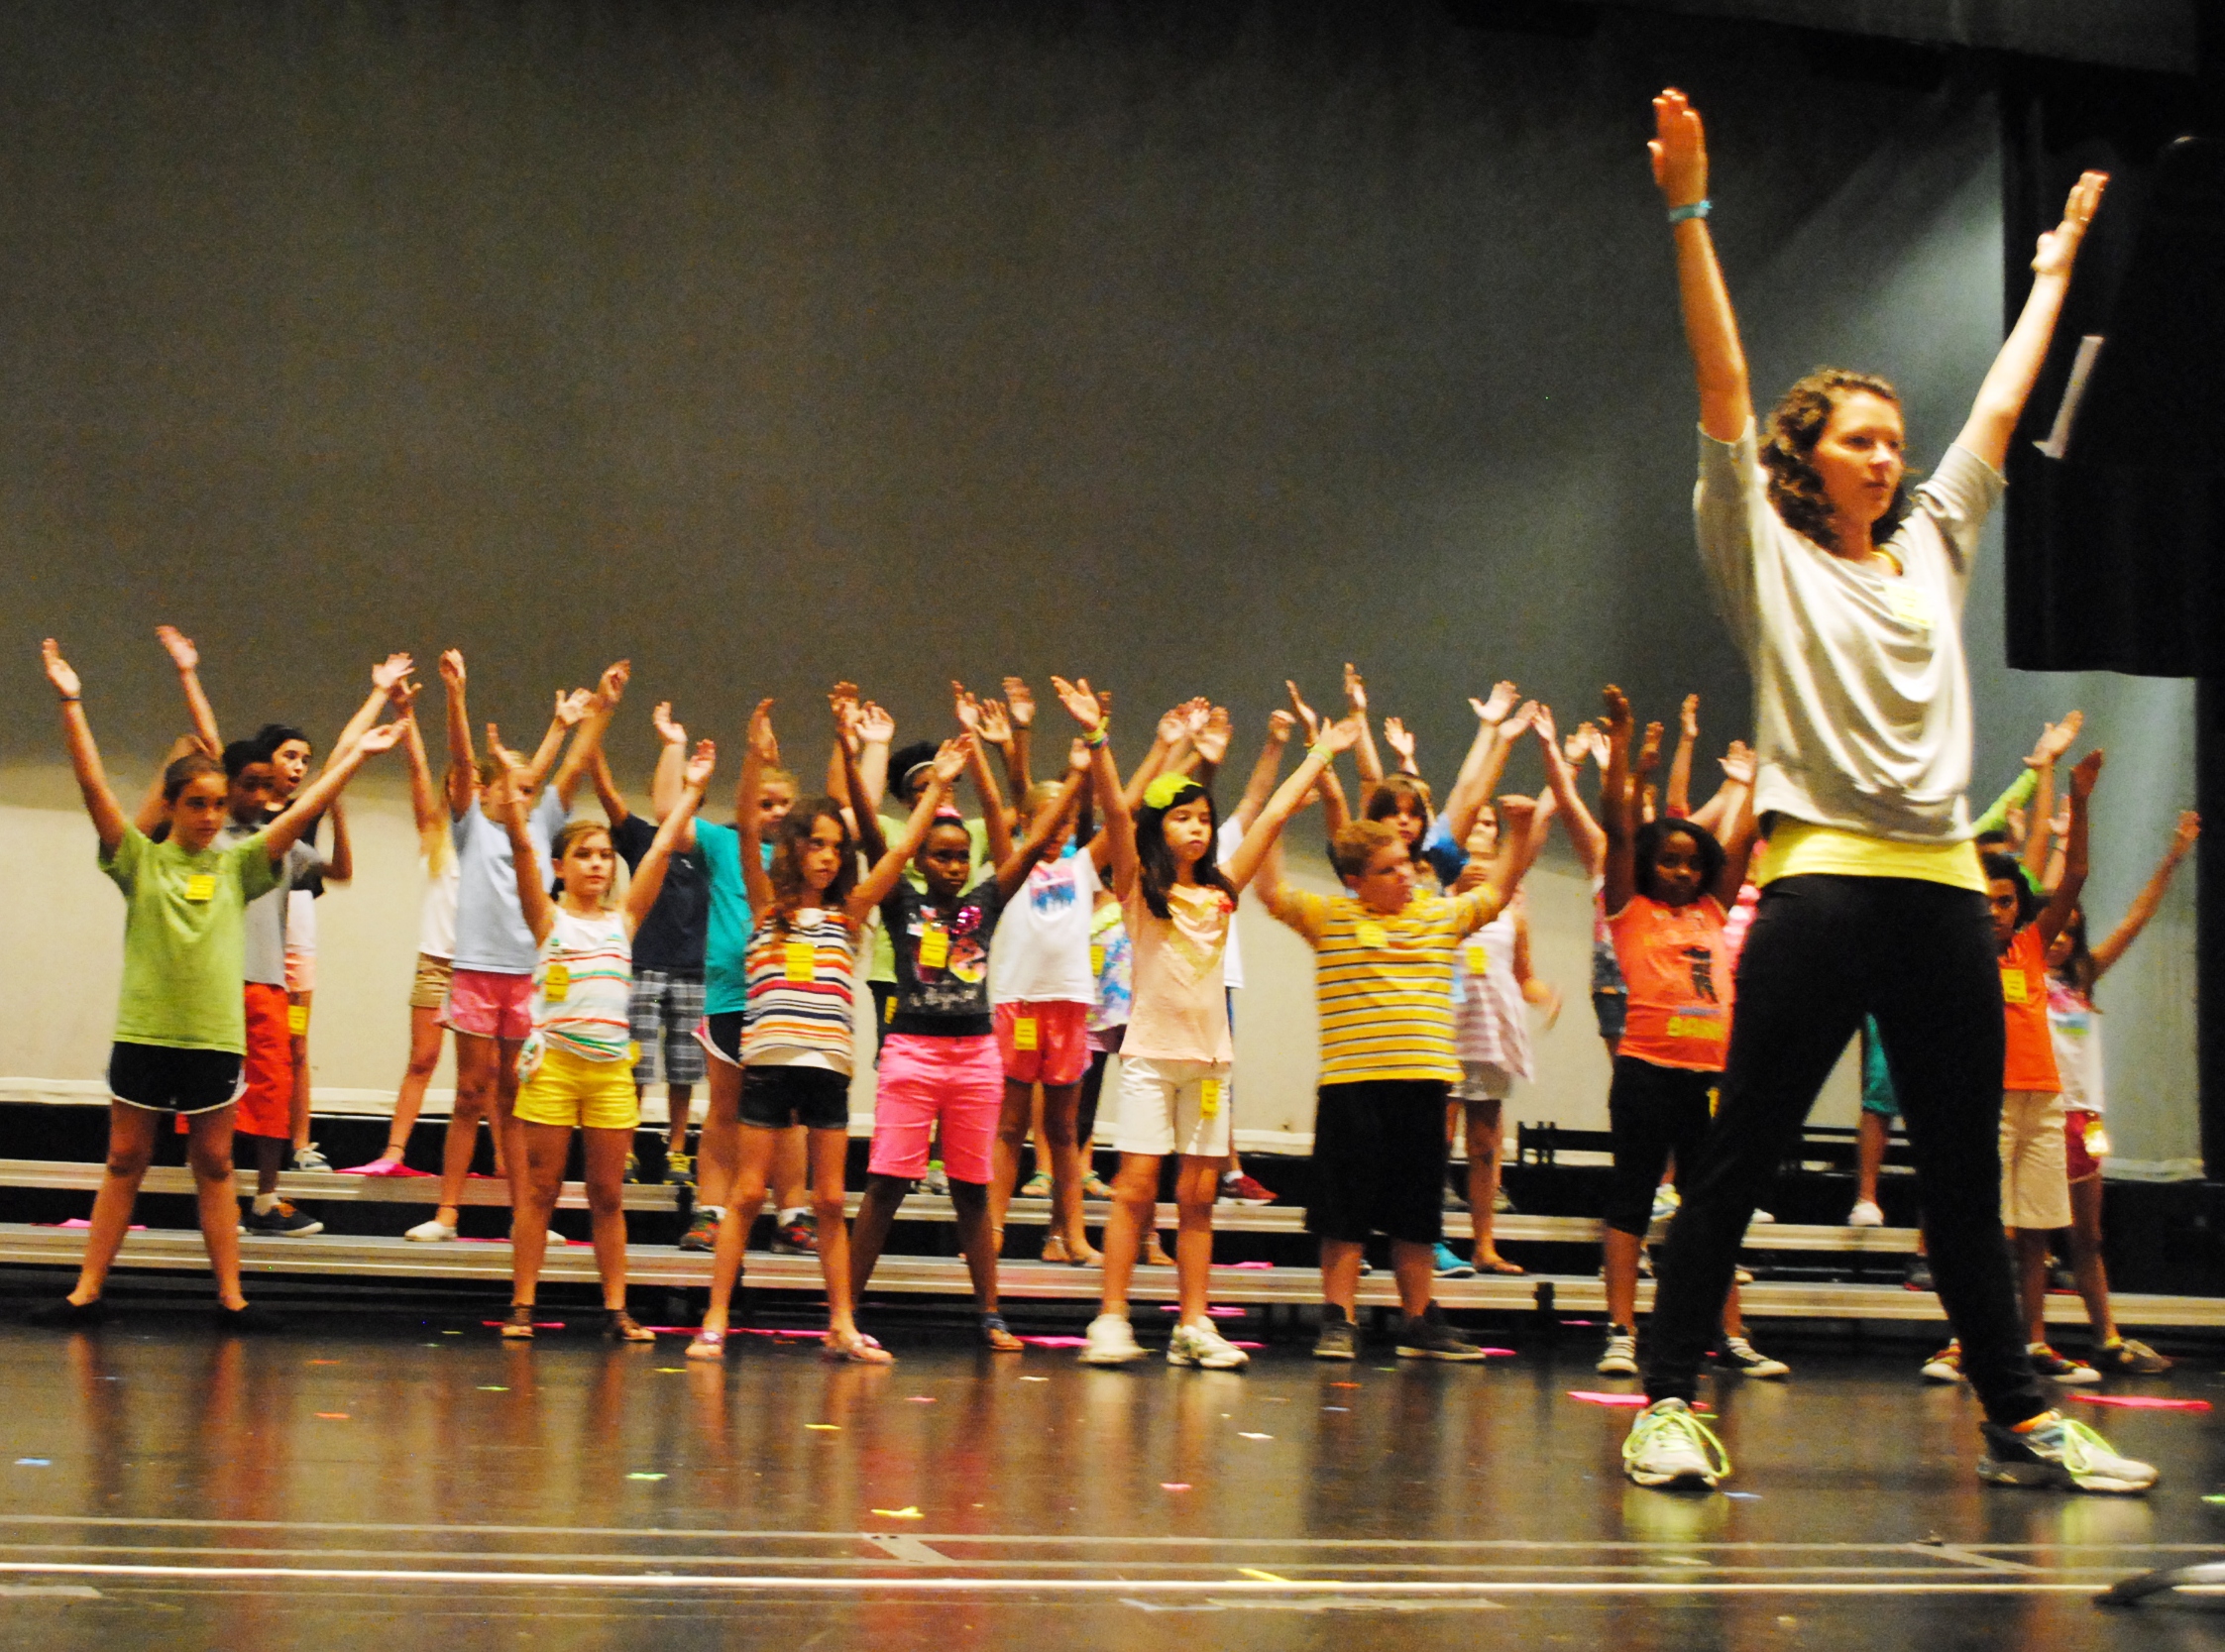 Caption: Mandy Bell, PLUS Camp Choreographer, leads the campers in part of their routine for the final performance on Saturday.